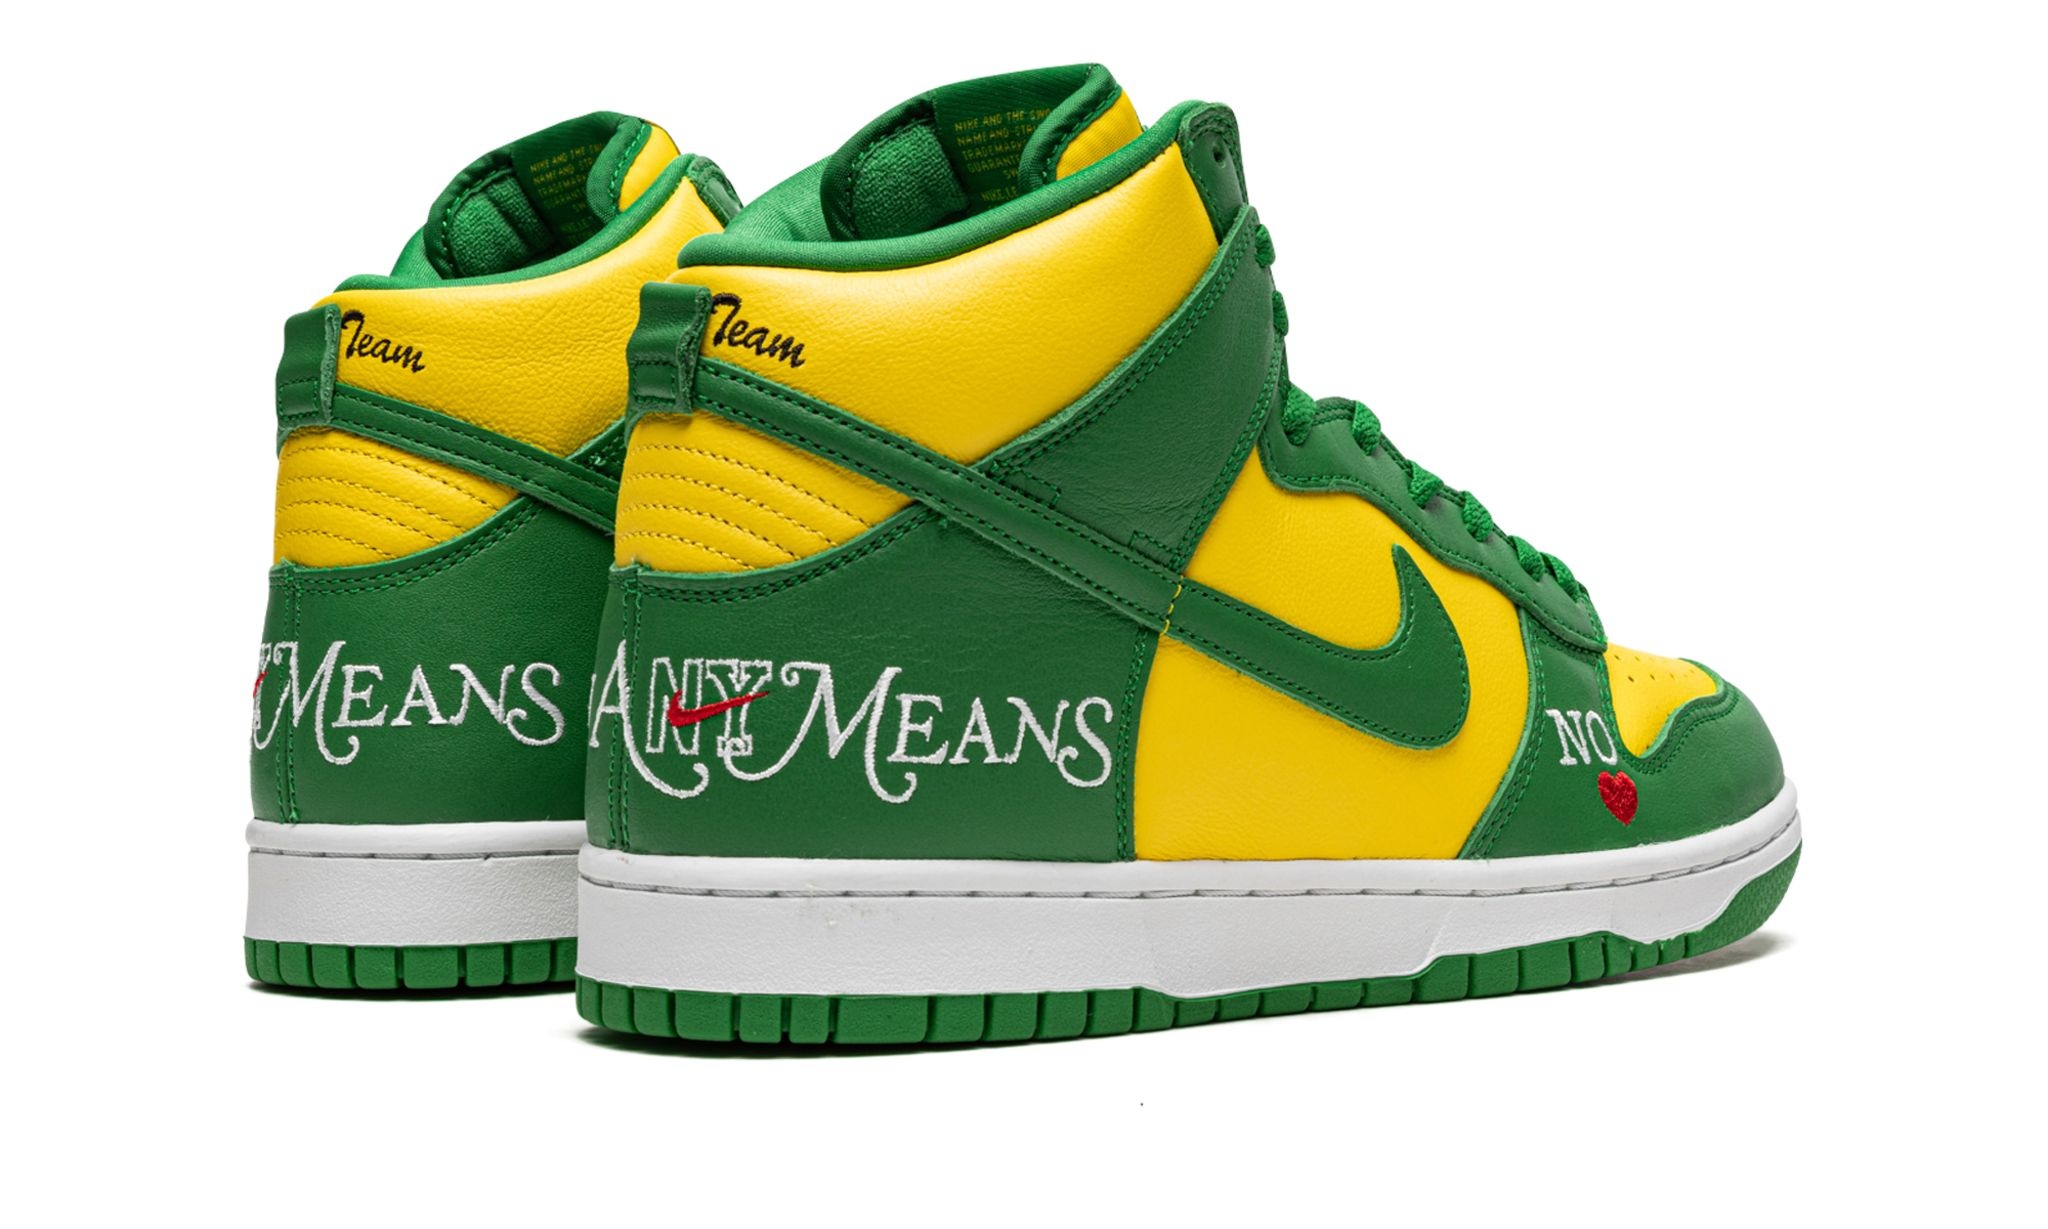 SB Dunk High "Supreme - By Any Means - Green/Yellow" - 3